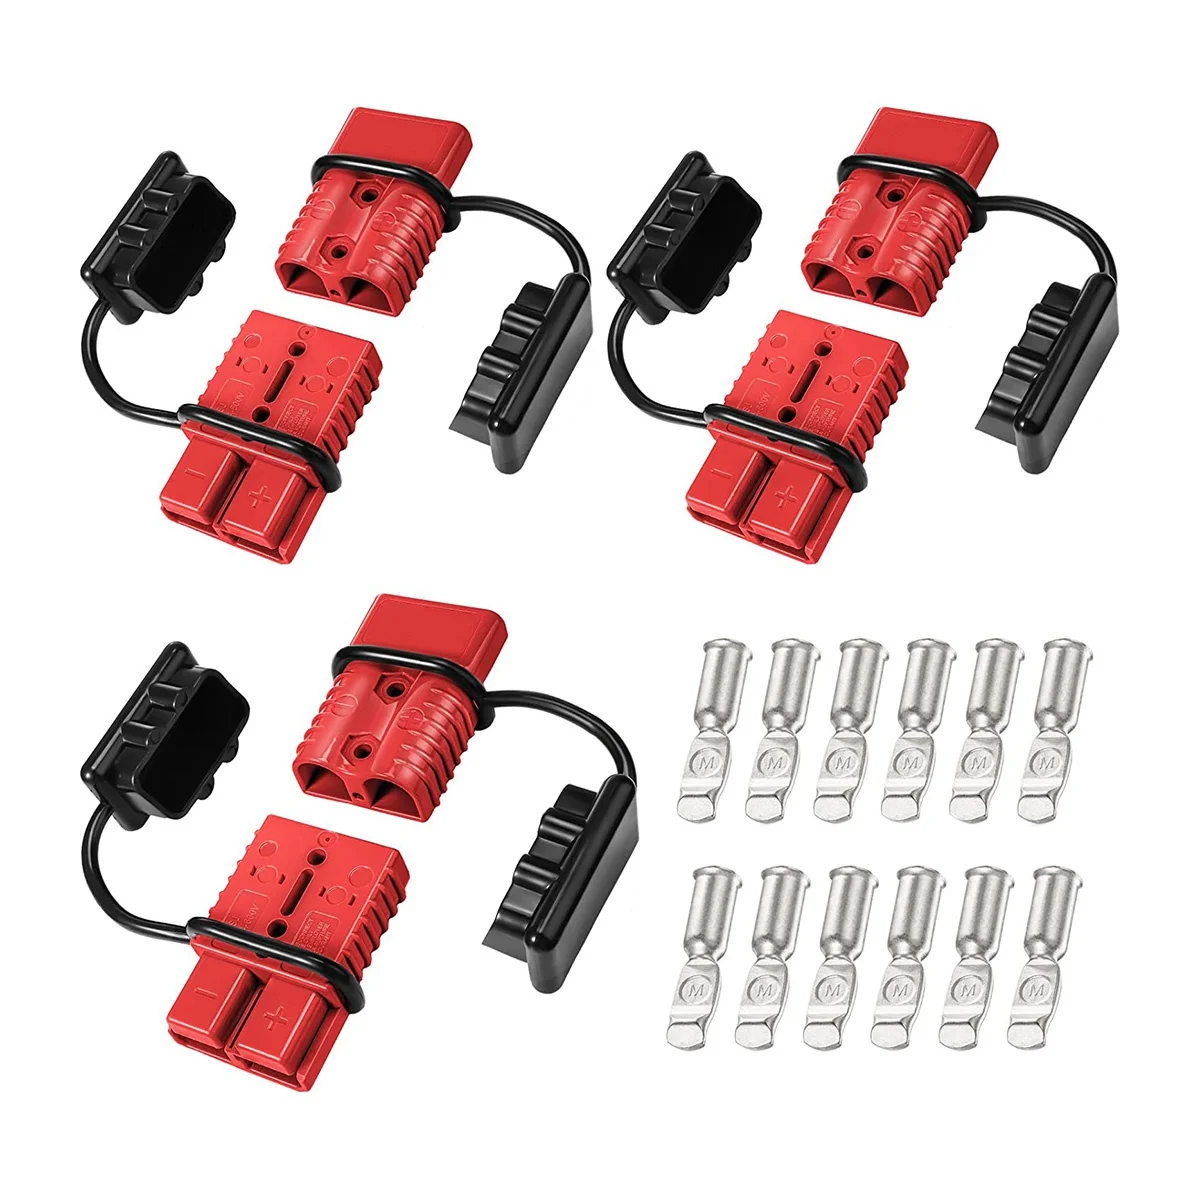 

6Pcs 175A 2-4 AWGbattery Power Connector Cable Quick Connect Disconnect Kit for Anderson Connector for Car ATV Winch Trailer